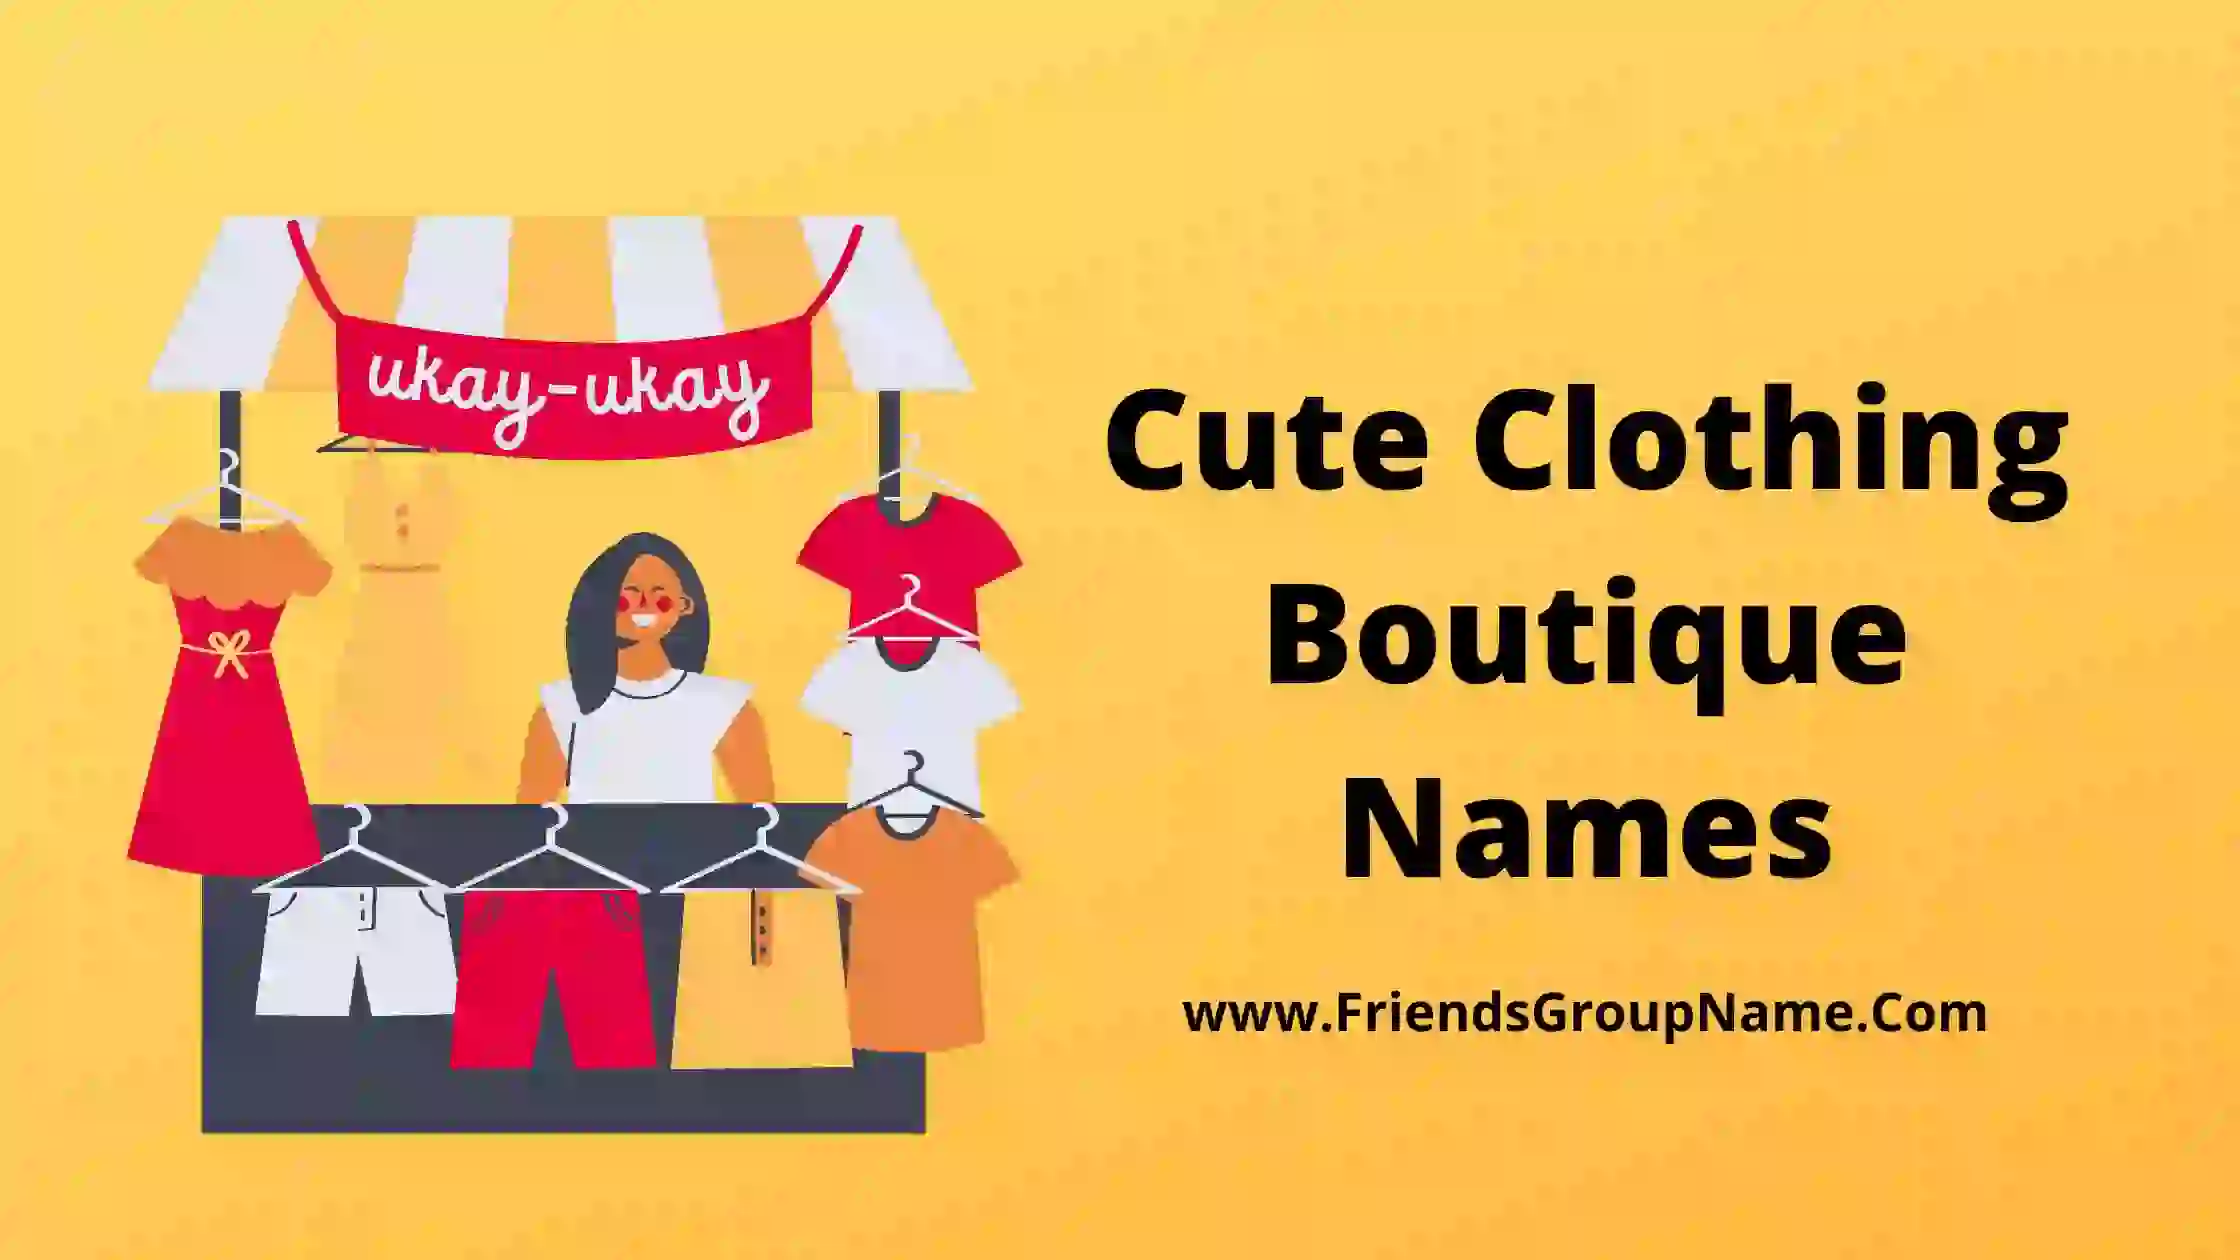 Cute Clothing Boutique Names